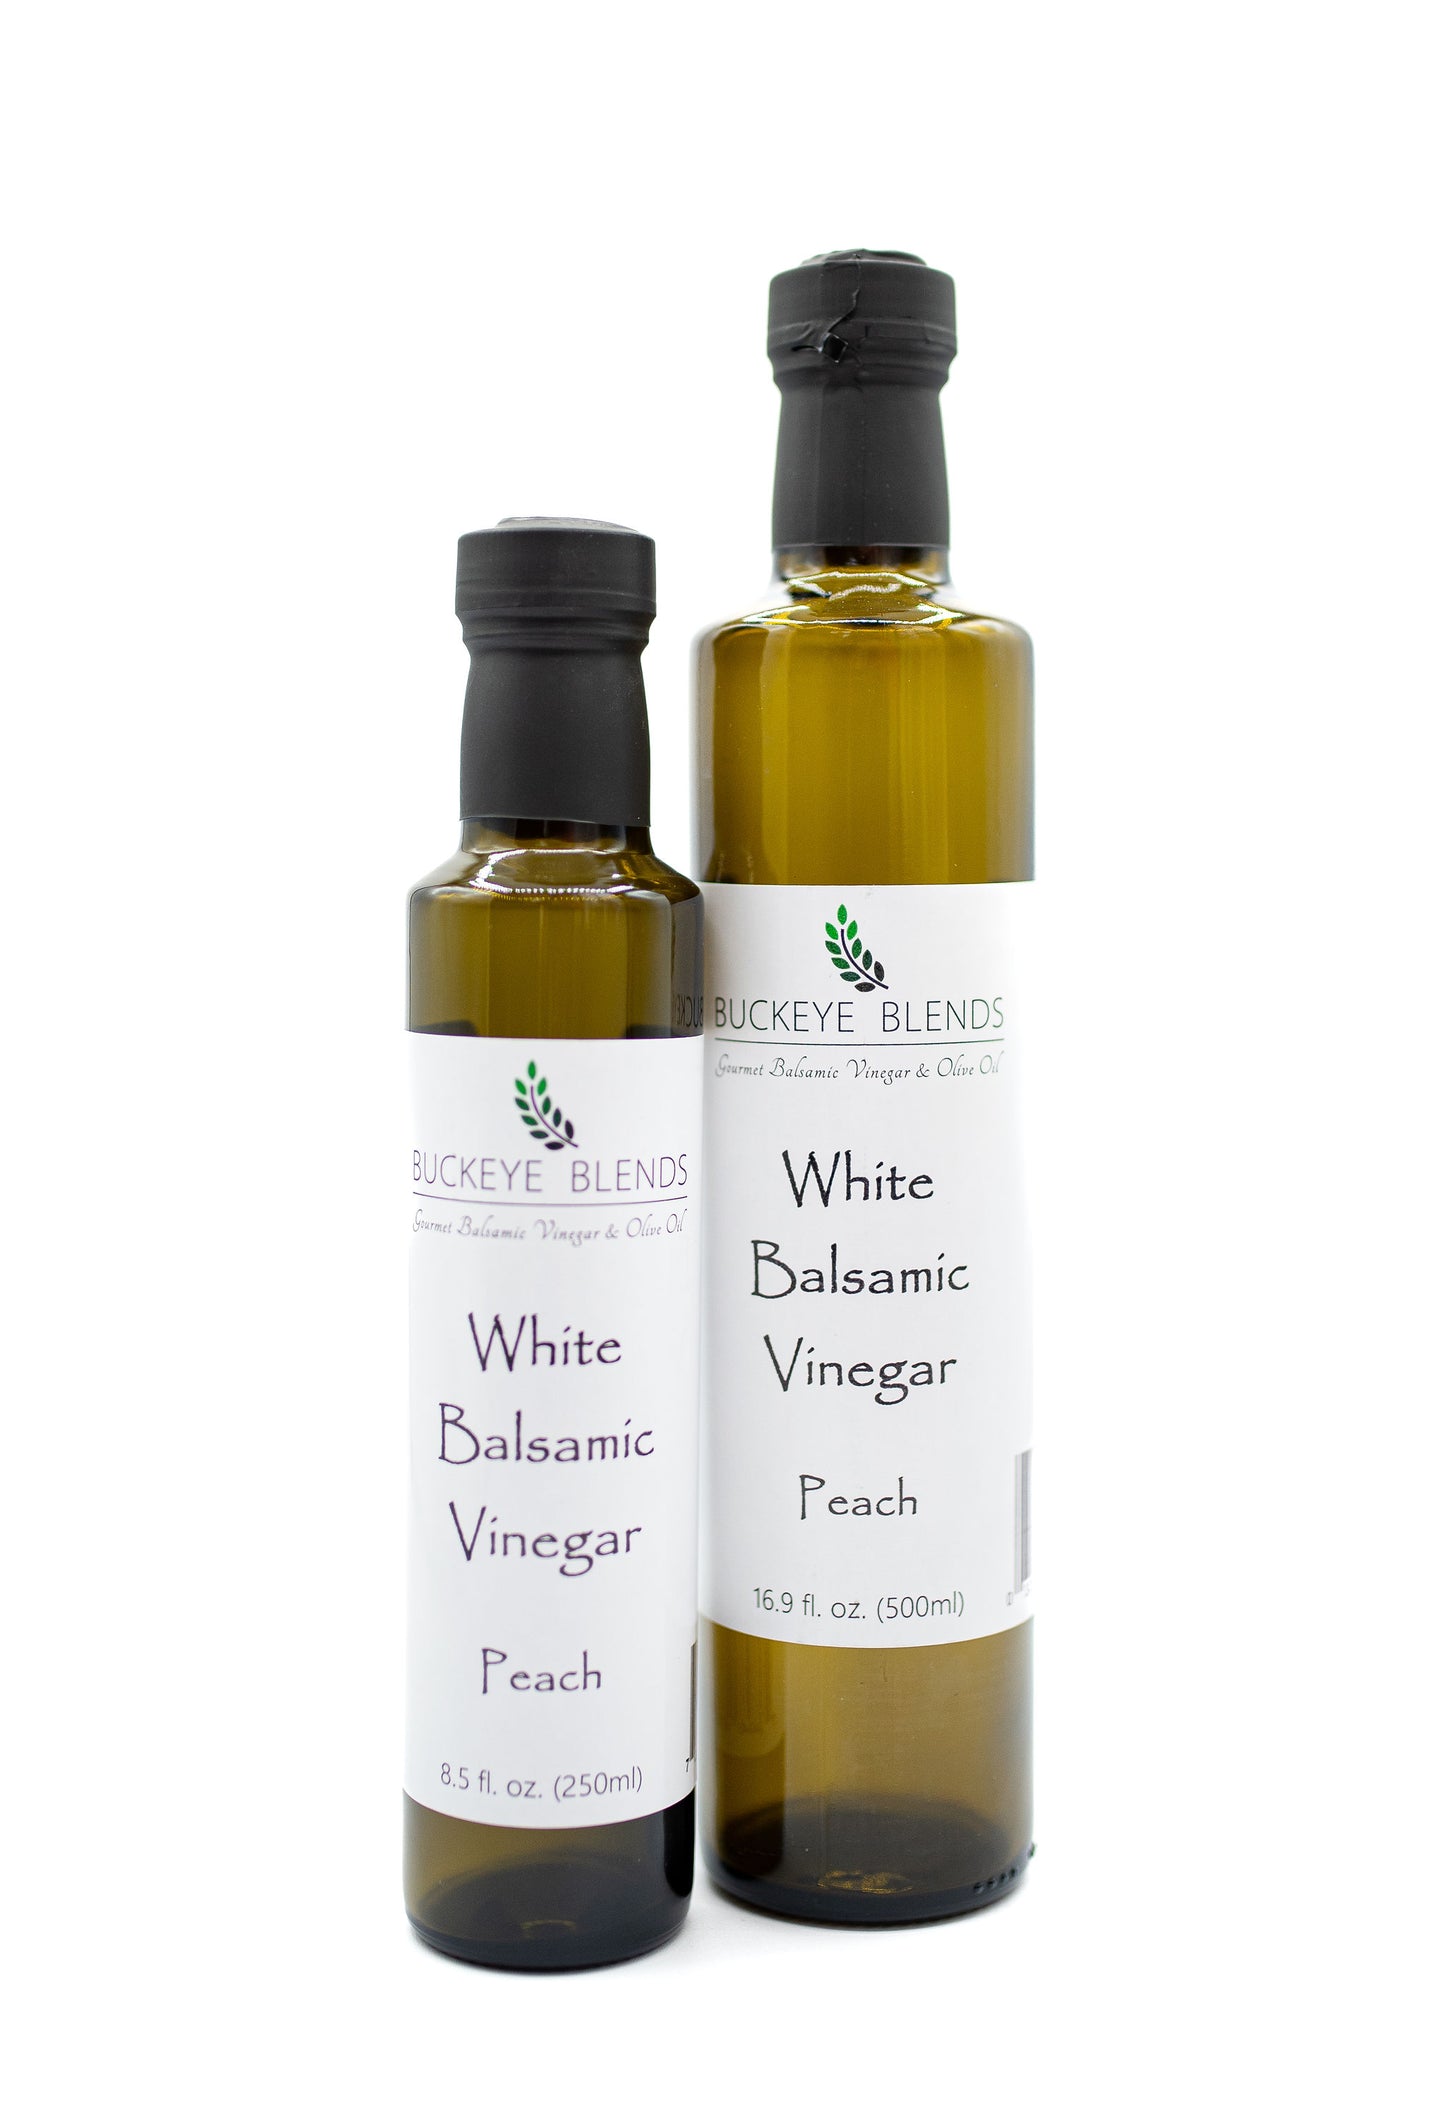 Buckeye Blends Peach White Balsamic Vinegar is sweet and rich and a perfect dressing for fish, chicken, or pork.  It's thick like a balsamic glaze and makes a tasty balsamic vinaigrette when paired with our lemon olive oil.  It also pairs nicely with our orange extra virgin olive oil.